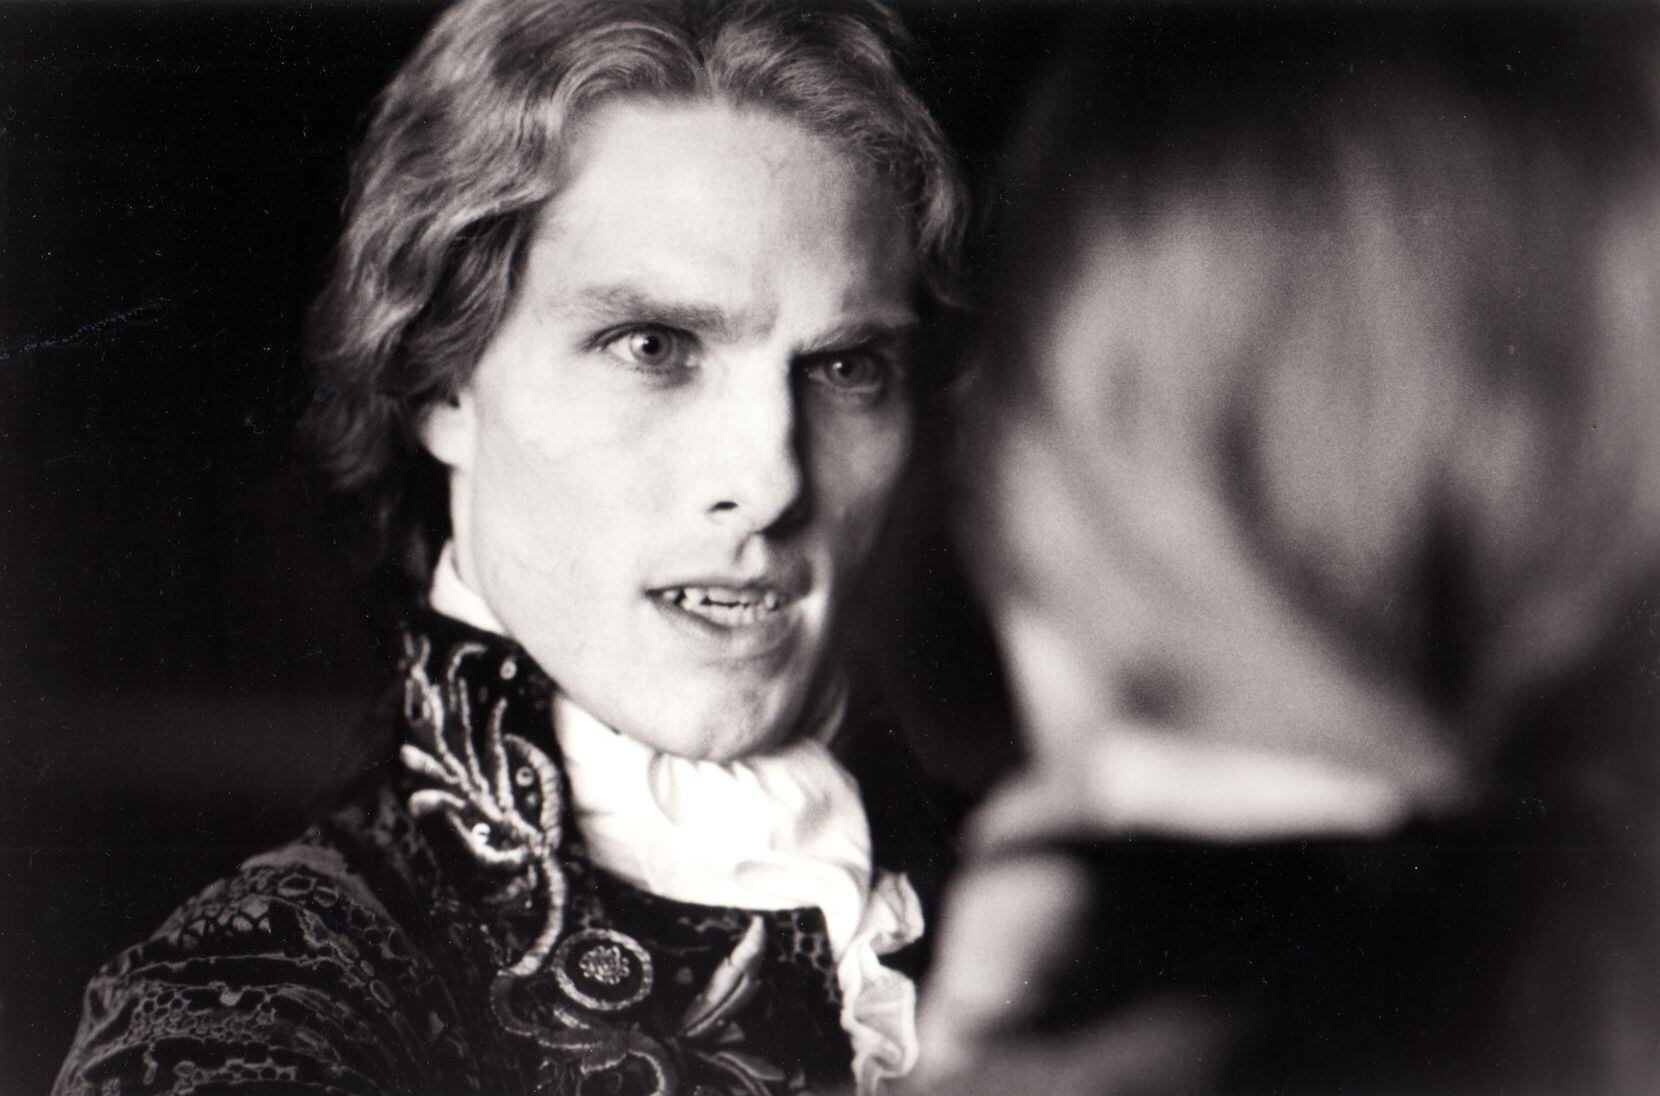 Anne Rice's novel 'Interview With the Vampire' became a hit film starring Tom Cruise. 